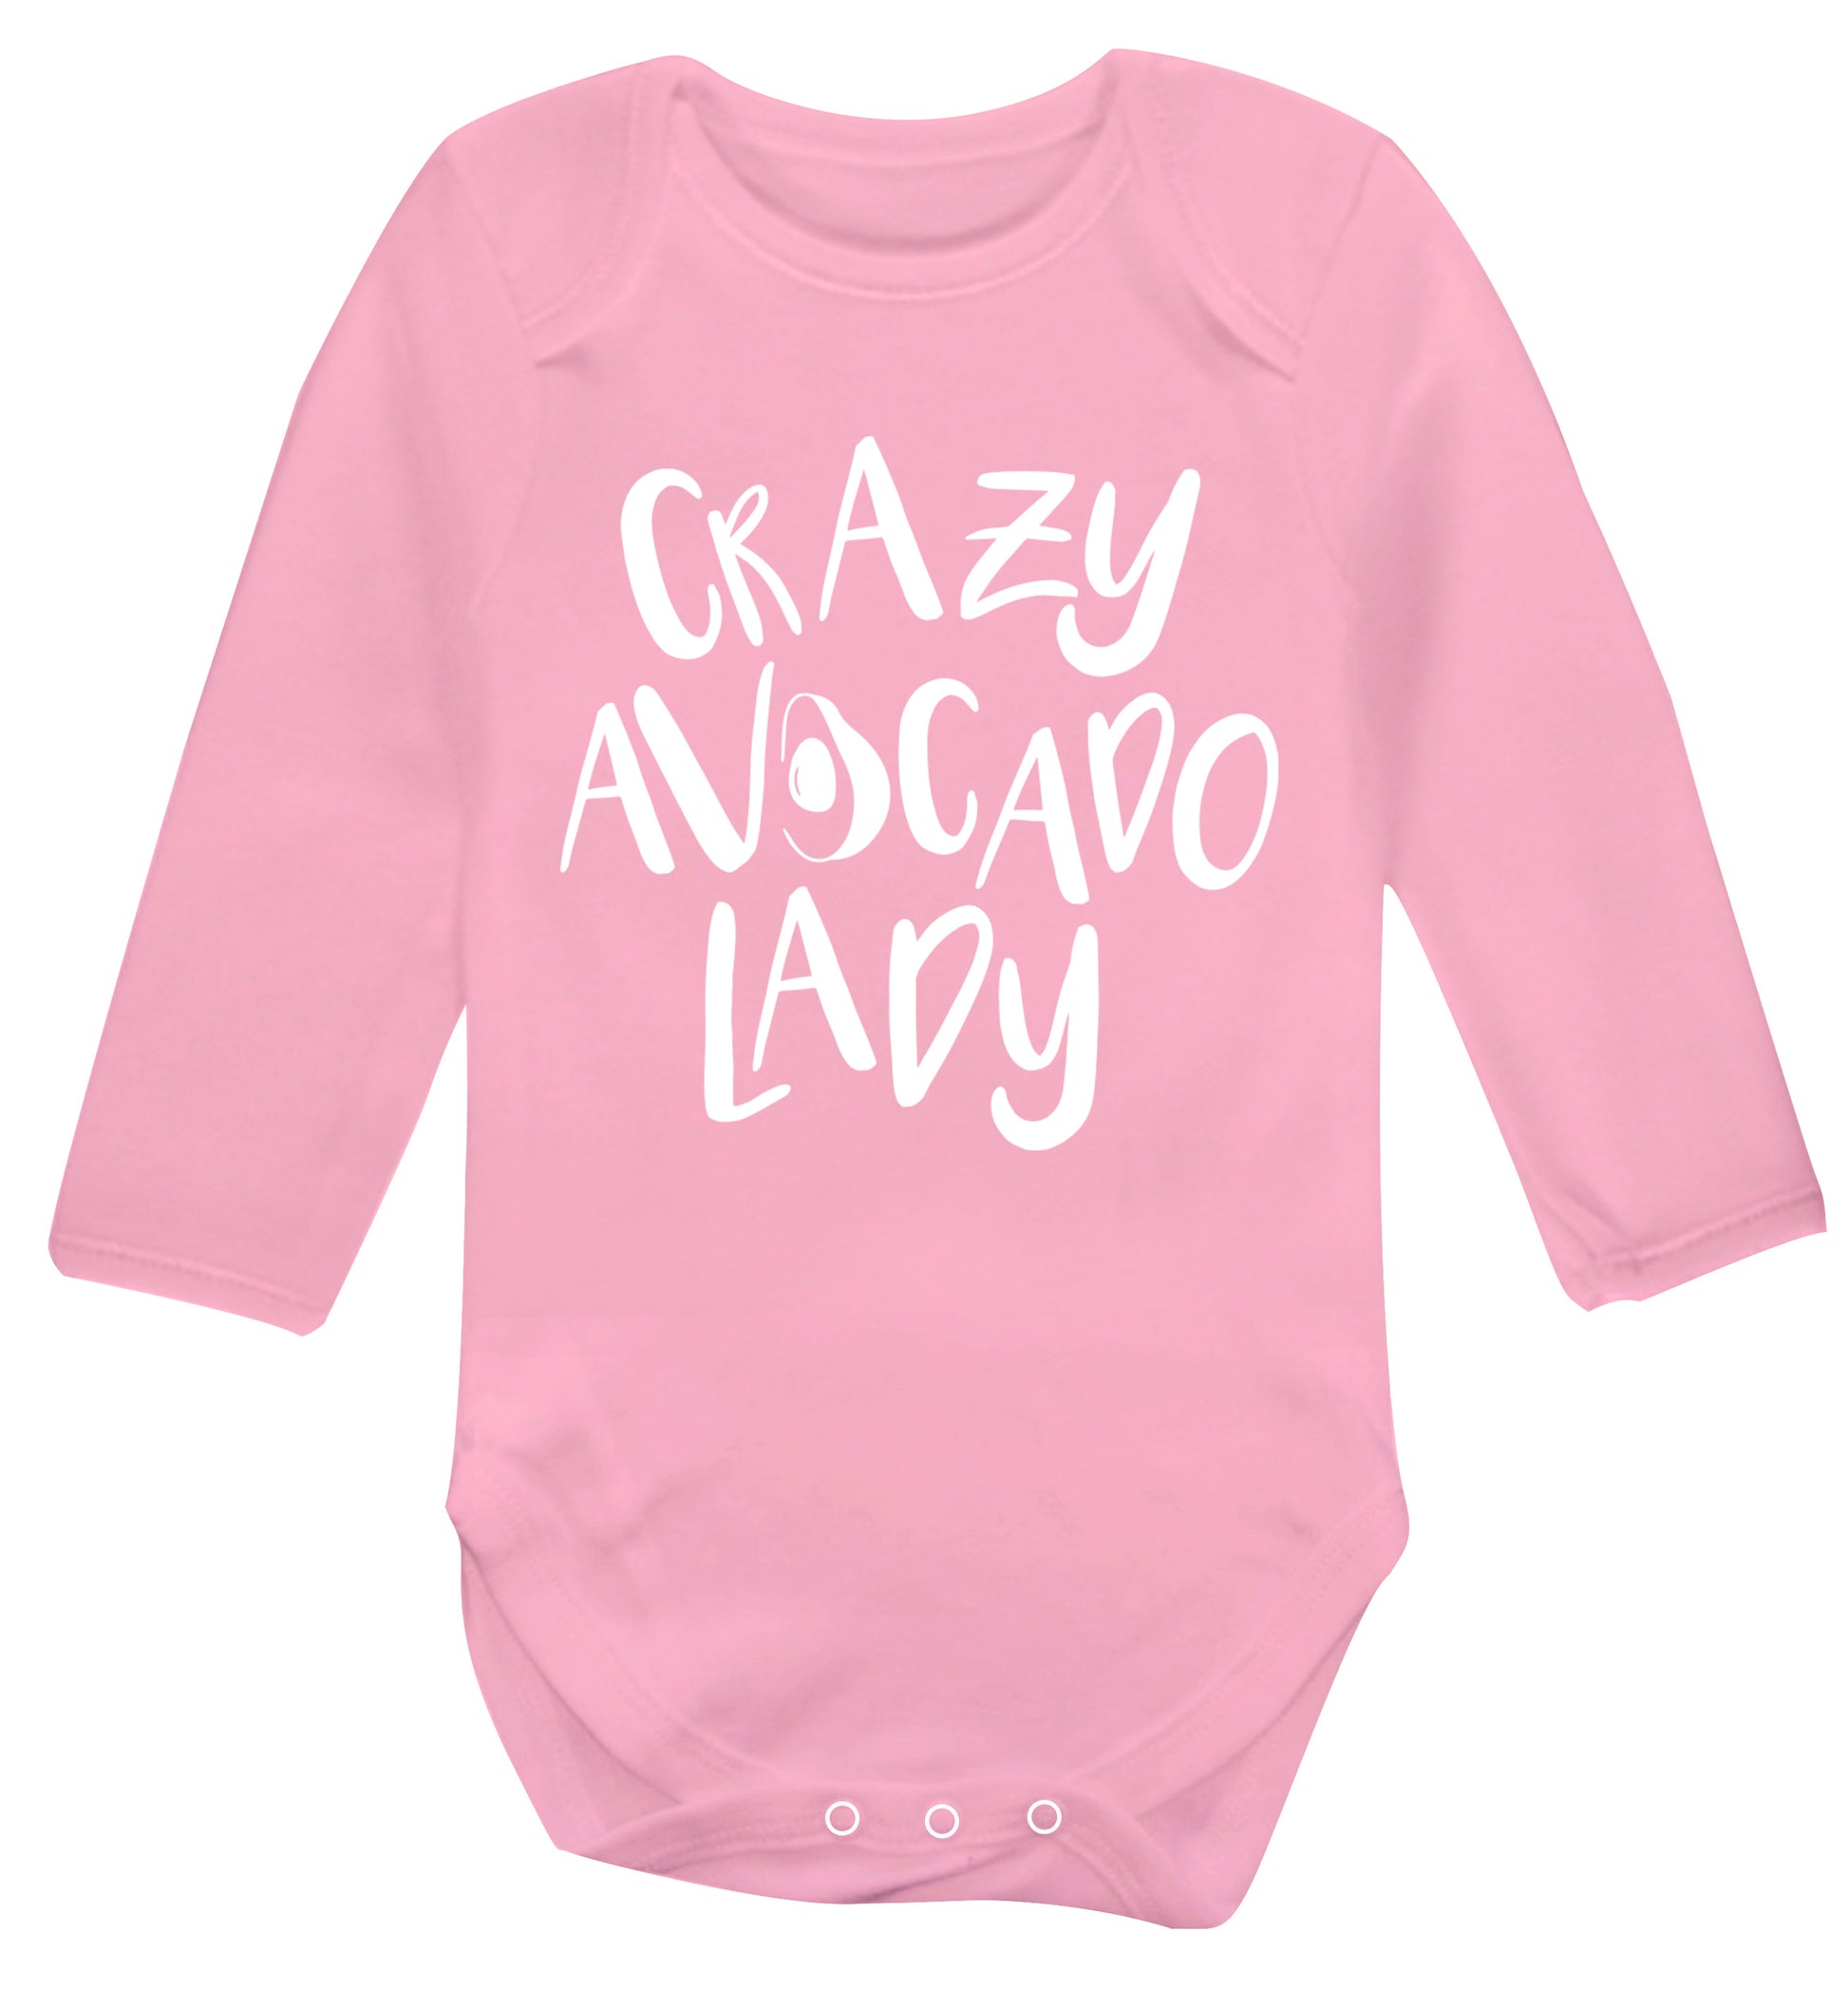 Crazy avocado lady Baby Vest long sleeved pale pink 6-12 months